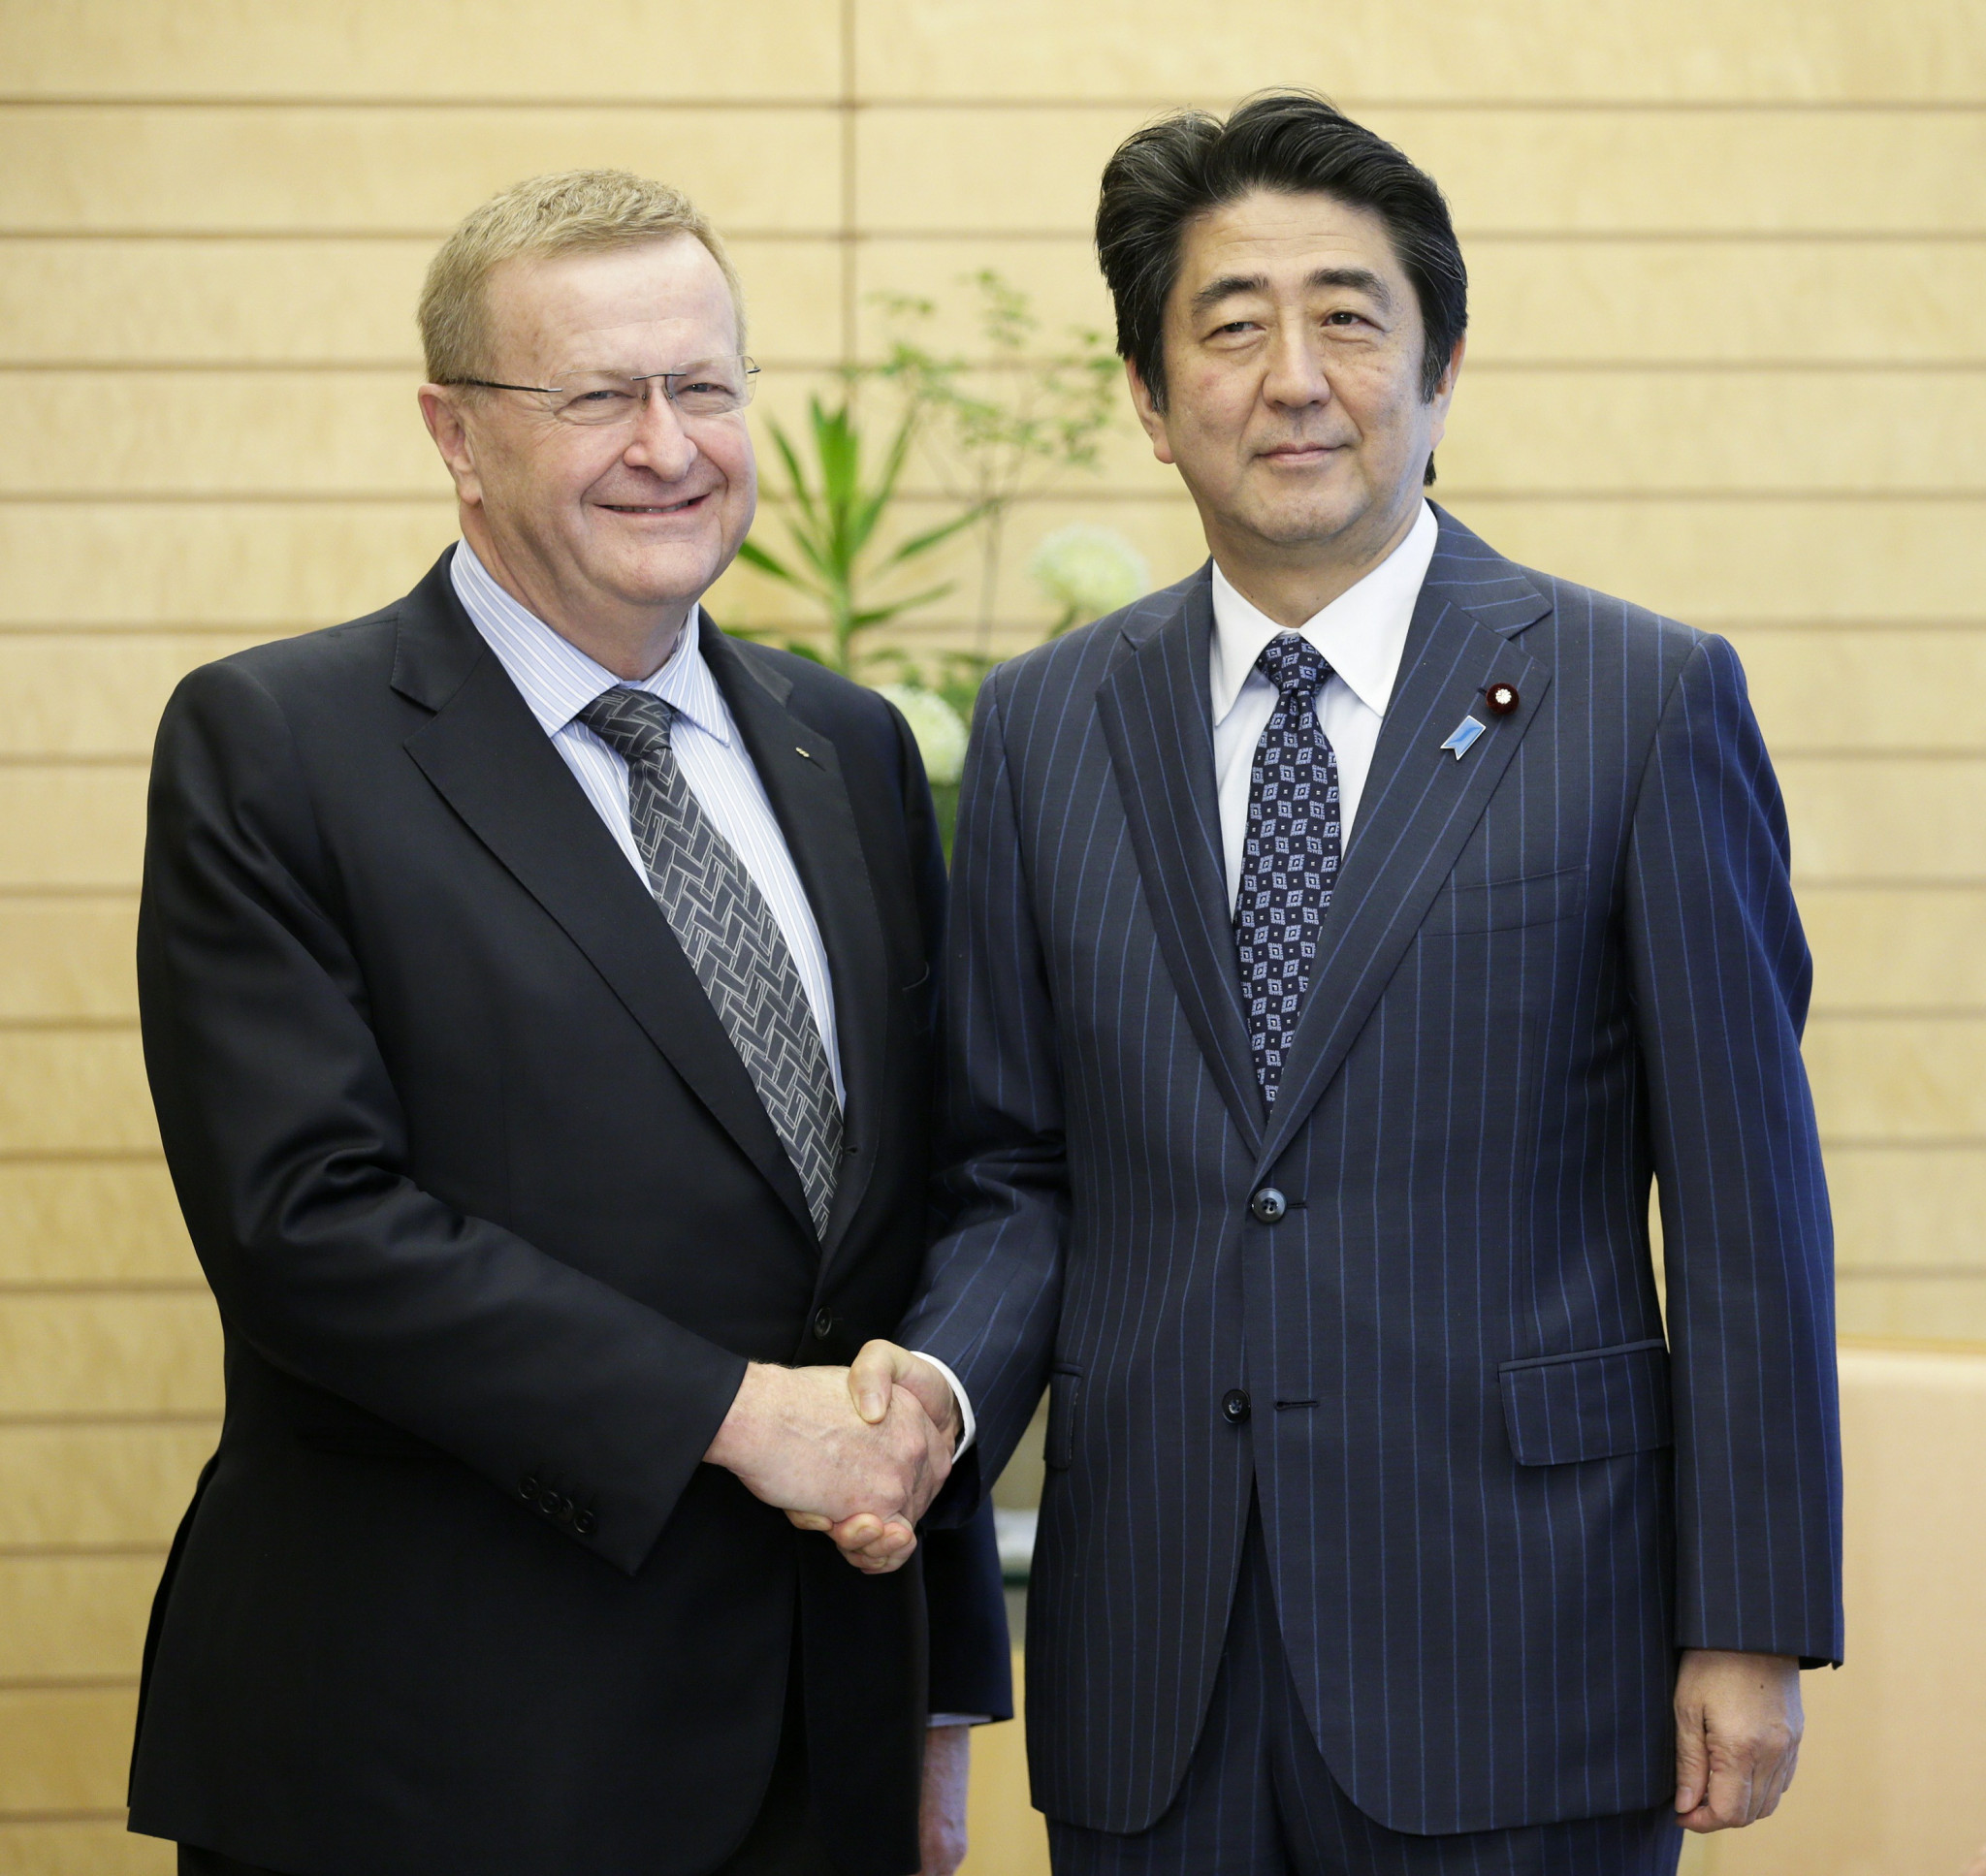 John Coates, left, has paid tribute to Shinzō Abe, right, who is stepping down as Japanese Prime Minister ©Getty Images